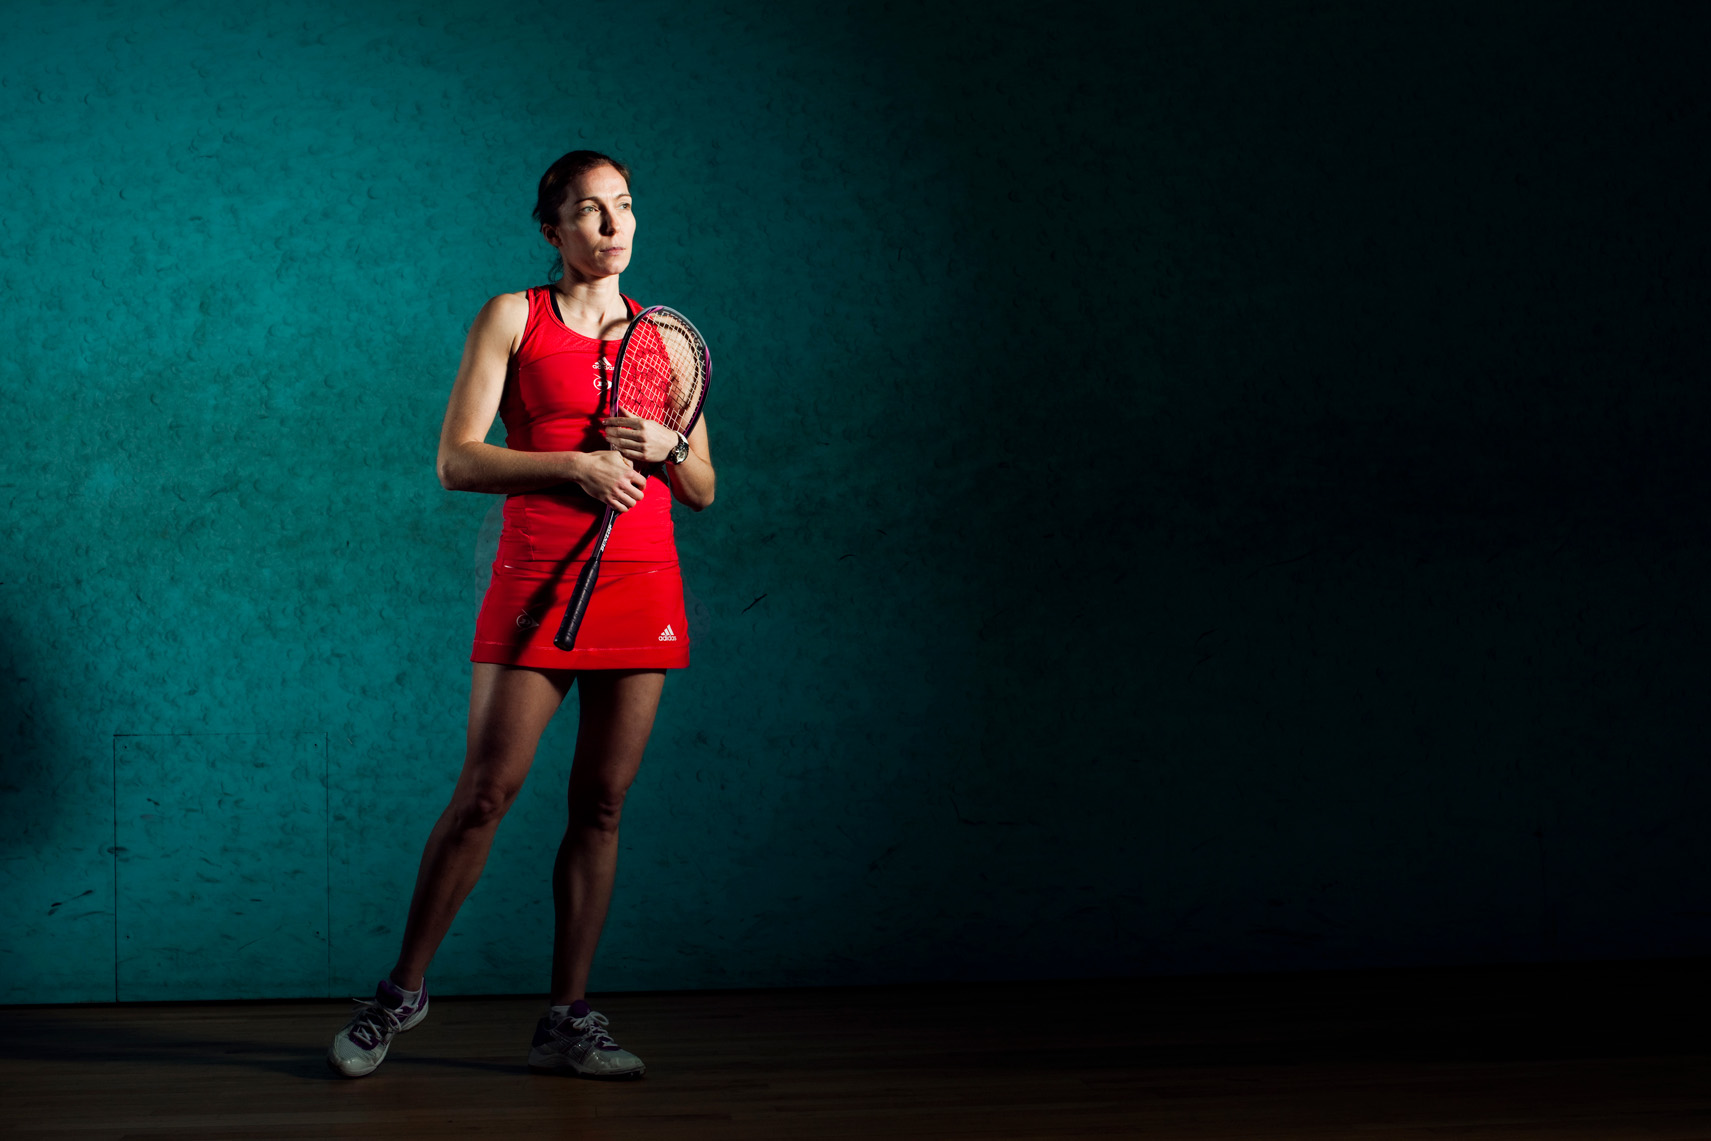 sports action photography: madeline perry squash player